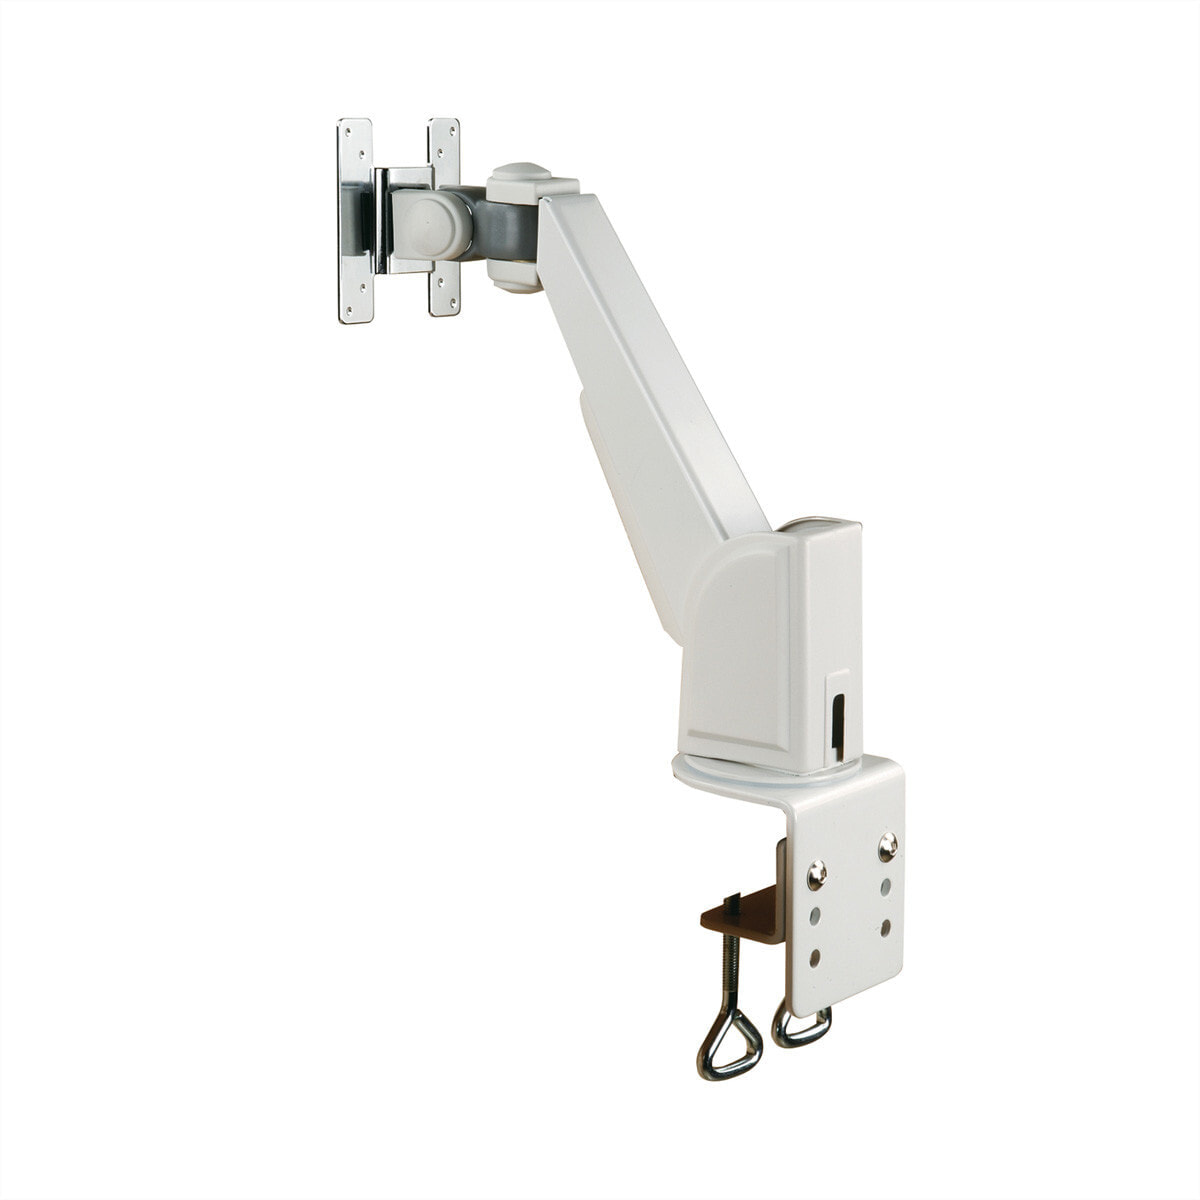 Value LCD Monitor Arm Standard, Wall Mount or Desk Clamp 17.99.1123